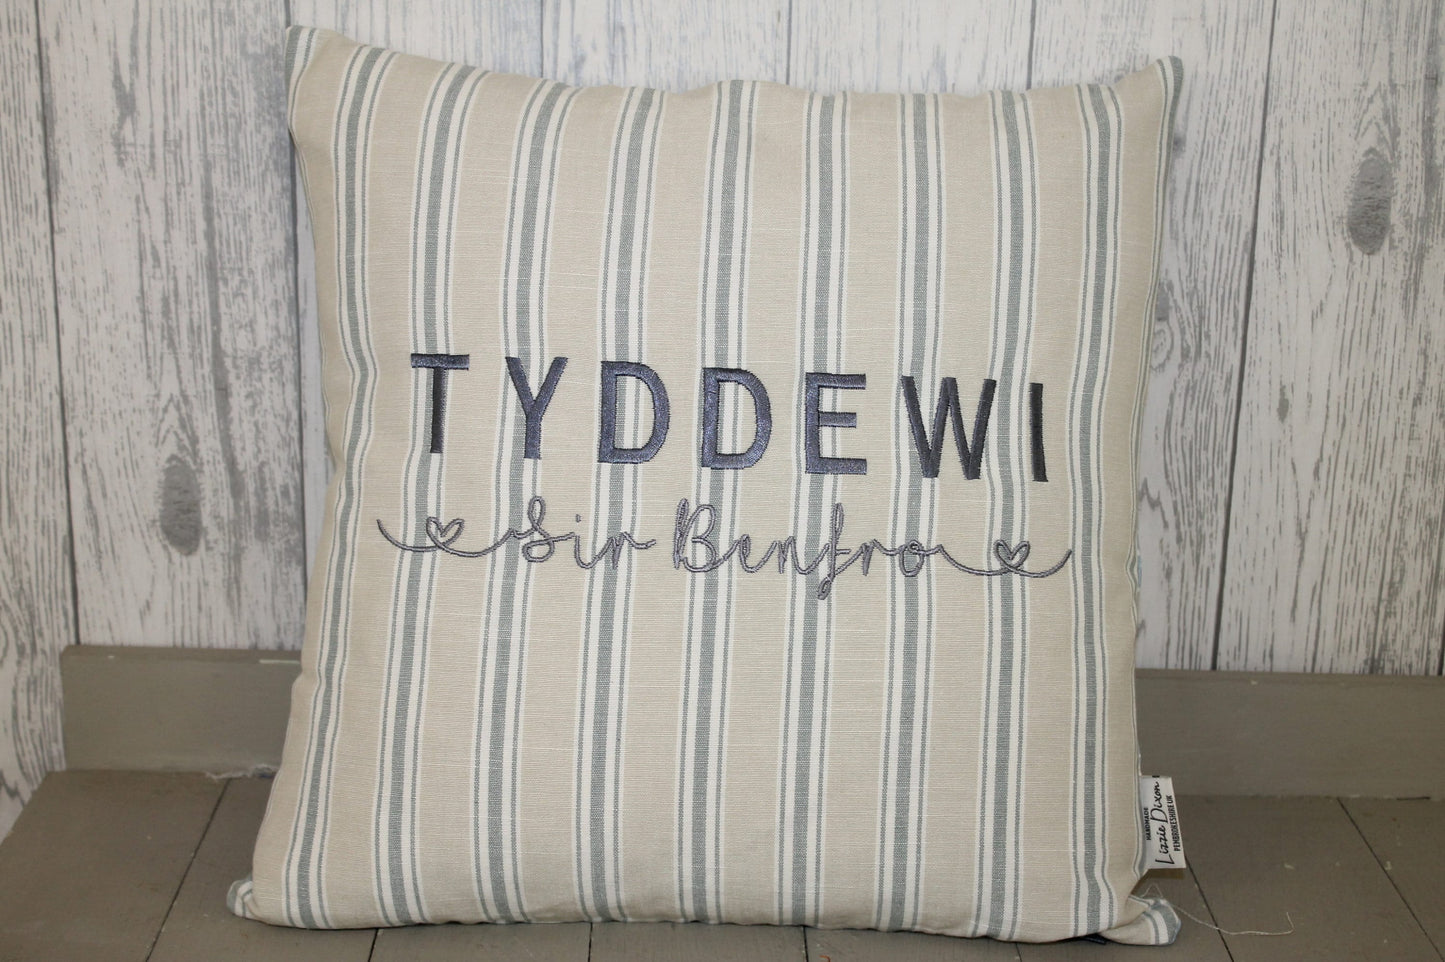 Location Cushions, Staycation Cushion,16" Nautical themed personalised beach holiday cushion- Blue and Taupe Ticking front ,Taupe back,